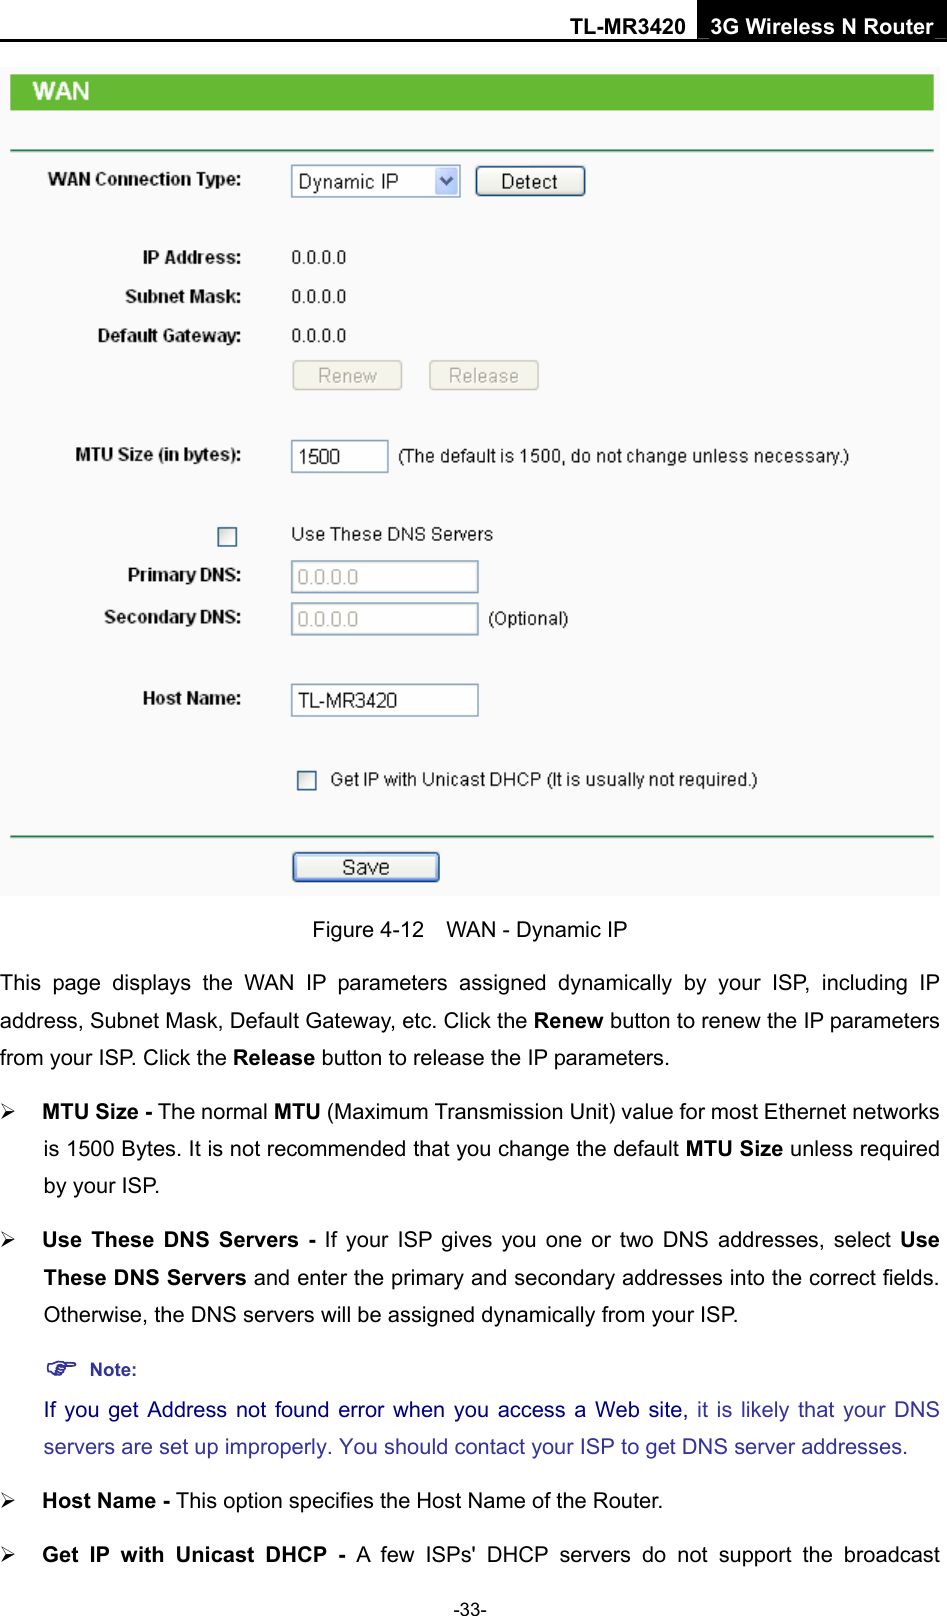 TL-MR3420 3G Wireless N Router -33-  Figure 4-12    WAN - Dynamic IP This page displays the WAN IP parameters assigned dynamically by your ISP, including IP address, Subnet Mask, Default Gateway, etc. Click the Renew button to renew the IP parameters from your ISP. Click the Release button to release the IP parameters. ¾ MTU Size - The normal MTU (Maximum Transmission Unit) value for most Ethernet networks is 1500 Bytes. It is not recommended that you change the default MTU Size unless required by your ISP.   ¾ Use These DNS Servers - If your ISP gives you one or two DNS addresses, select Use These DNS Servers and enter the primary and secondary addresses into the correct fields. Otherwise, the DNS servers will be assigned dynamically from your ISP.   ) Note: If you get Address not found error when you access a Web site, it is likely that your DNS servers are set up improperly. You should contact your ISP to get DNS server addresses.   ¾ Host Name - This option specifies the Host Name of the Router. ¾ Get IP with Unicast DHCP - A few ISPs&apos; DHCP servers do not support the broadcast 